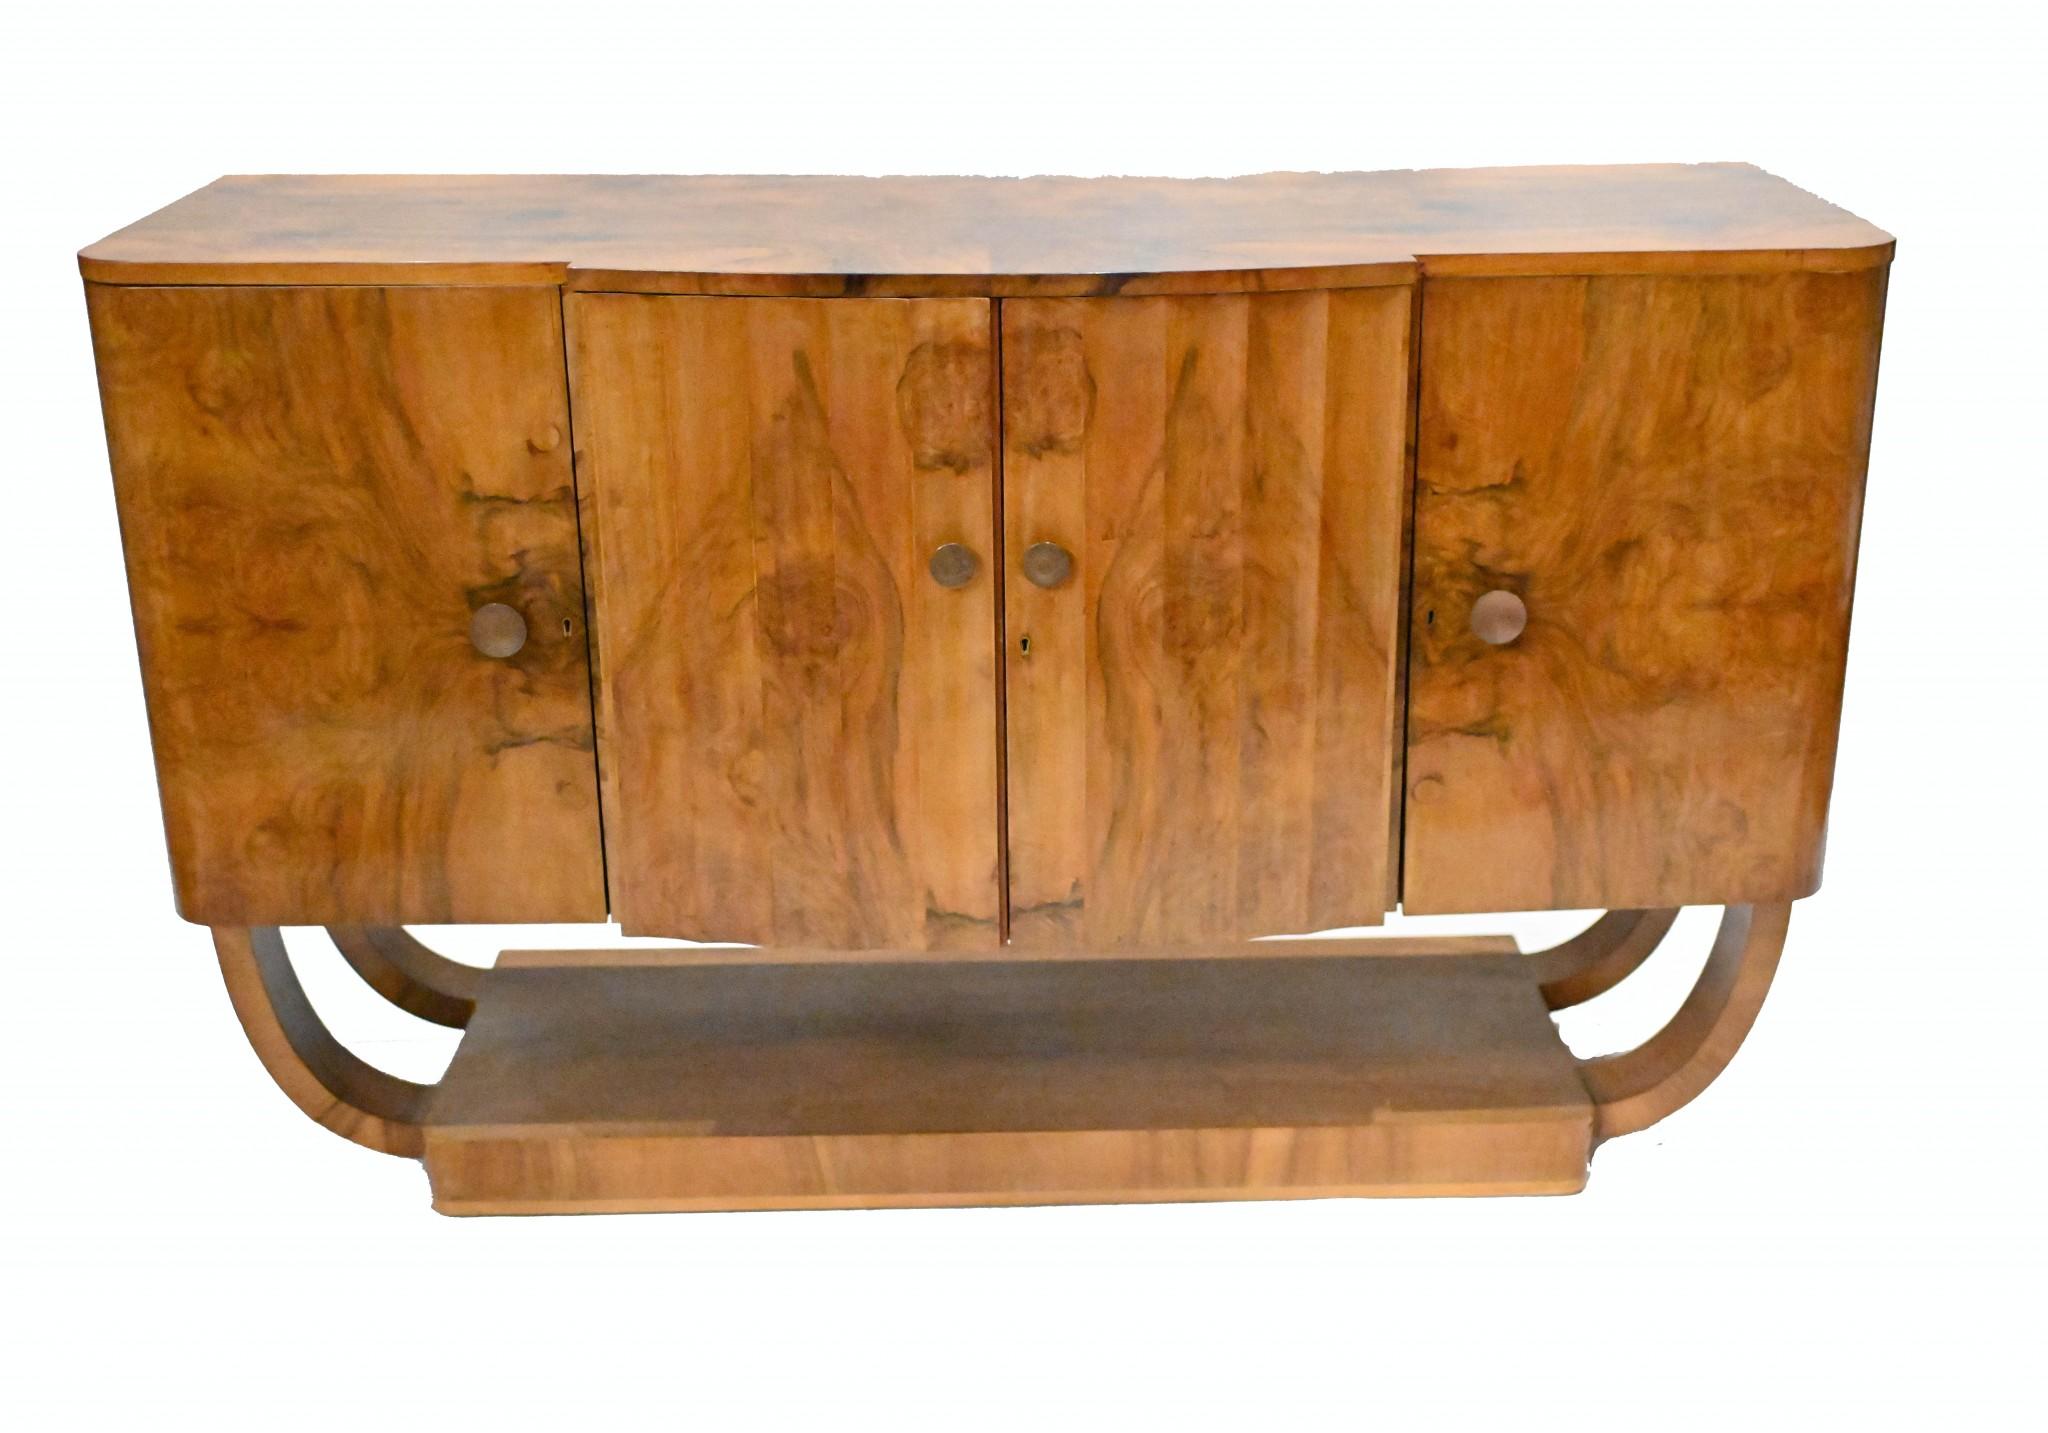 Period Art Deco Sideboard Walnut Server 1930 In Good Condition For Sale In Potters Bar, GB